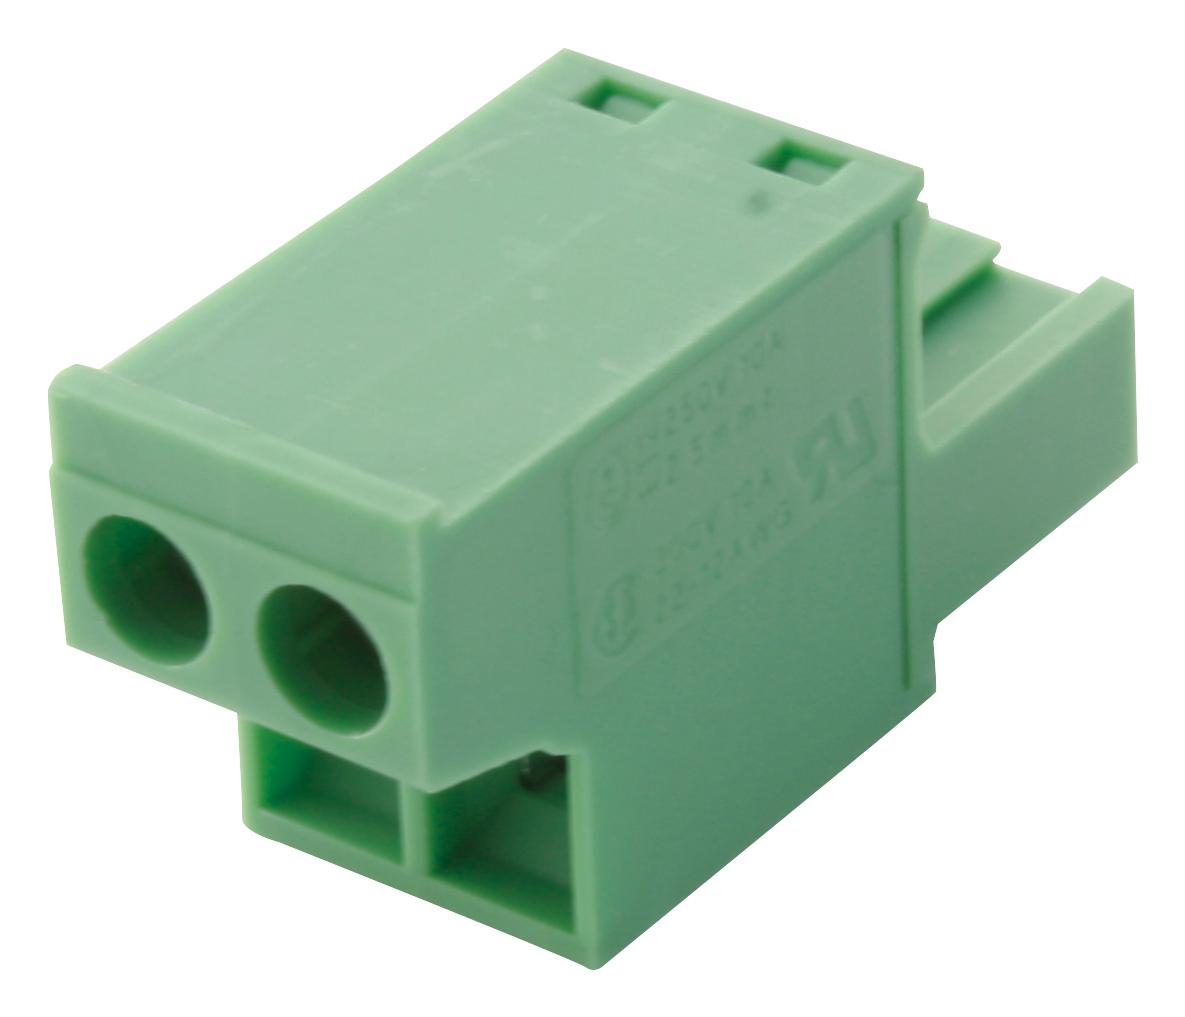 FRONT-MSTB2,5/8-ST-5,08 TERMINAL BLOCK, PLUGGABLE, 8POS, 12AWG PHOENIX CONTACT